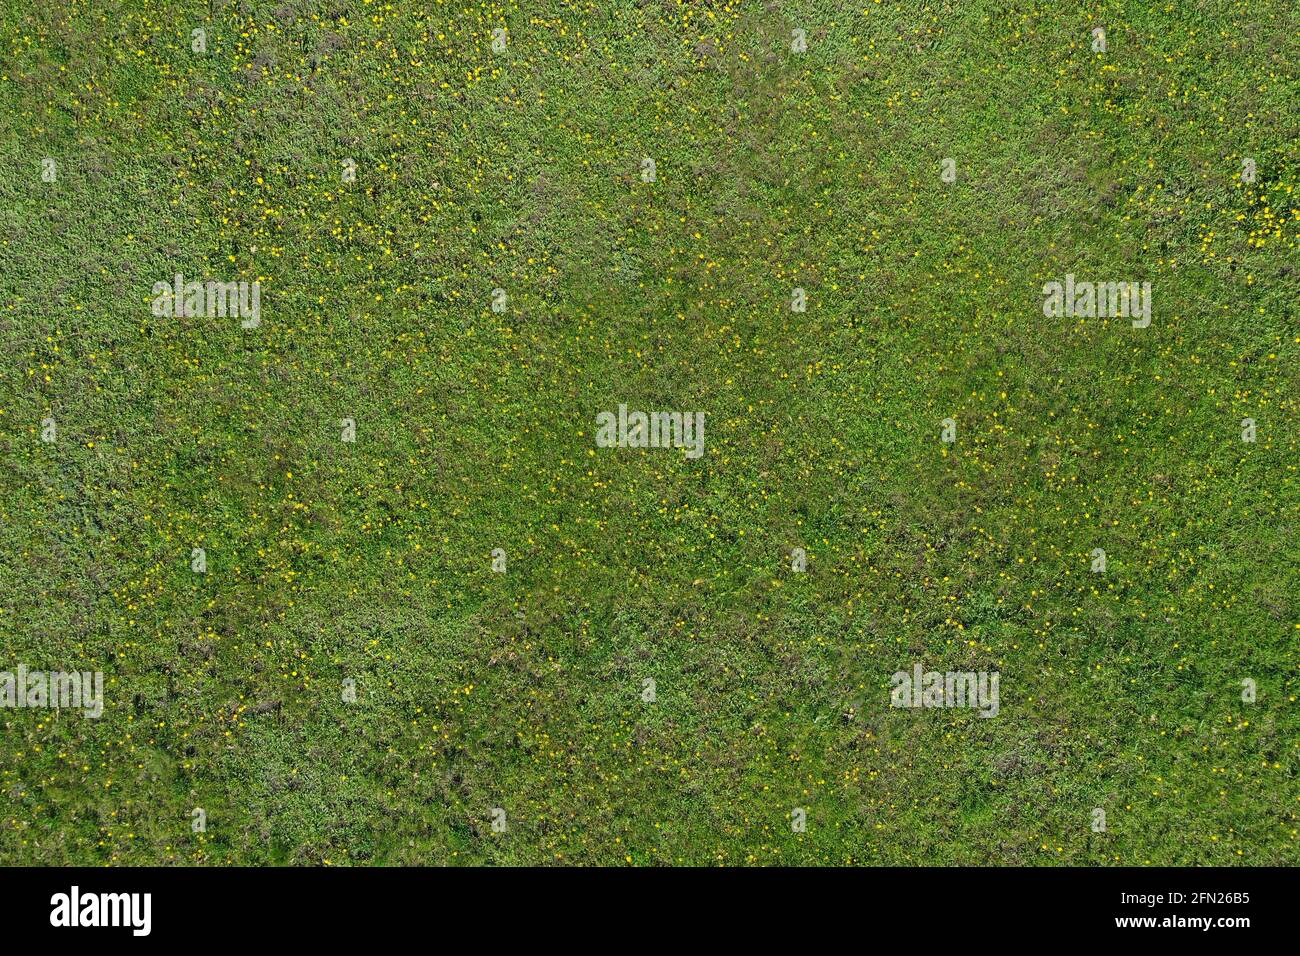 Top view of green grass and yellow dandelions, natural background Stock Photo